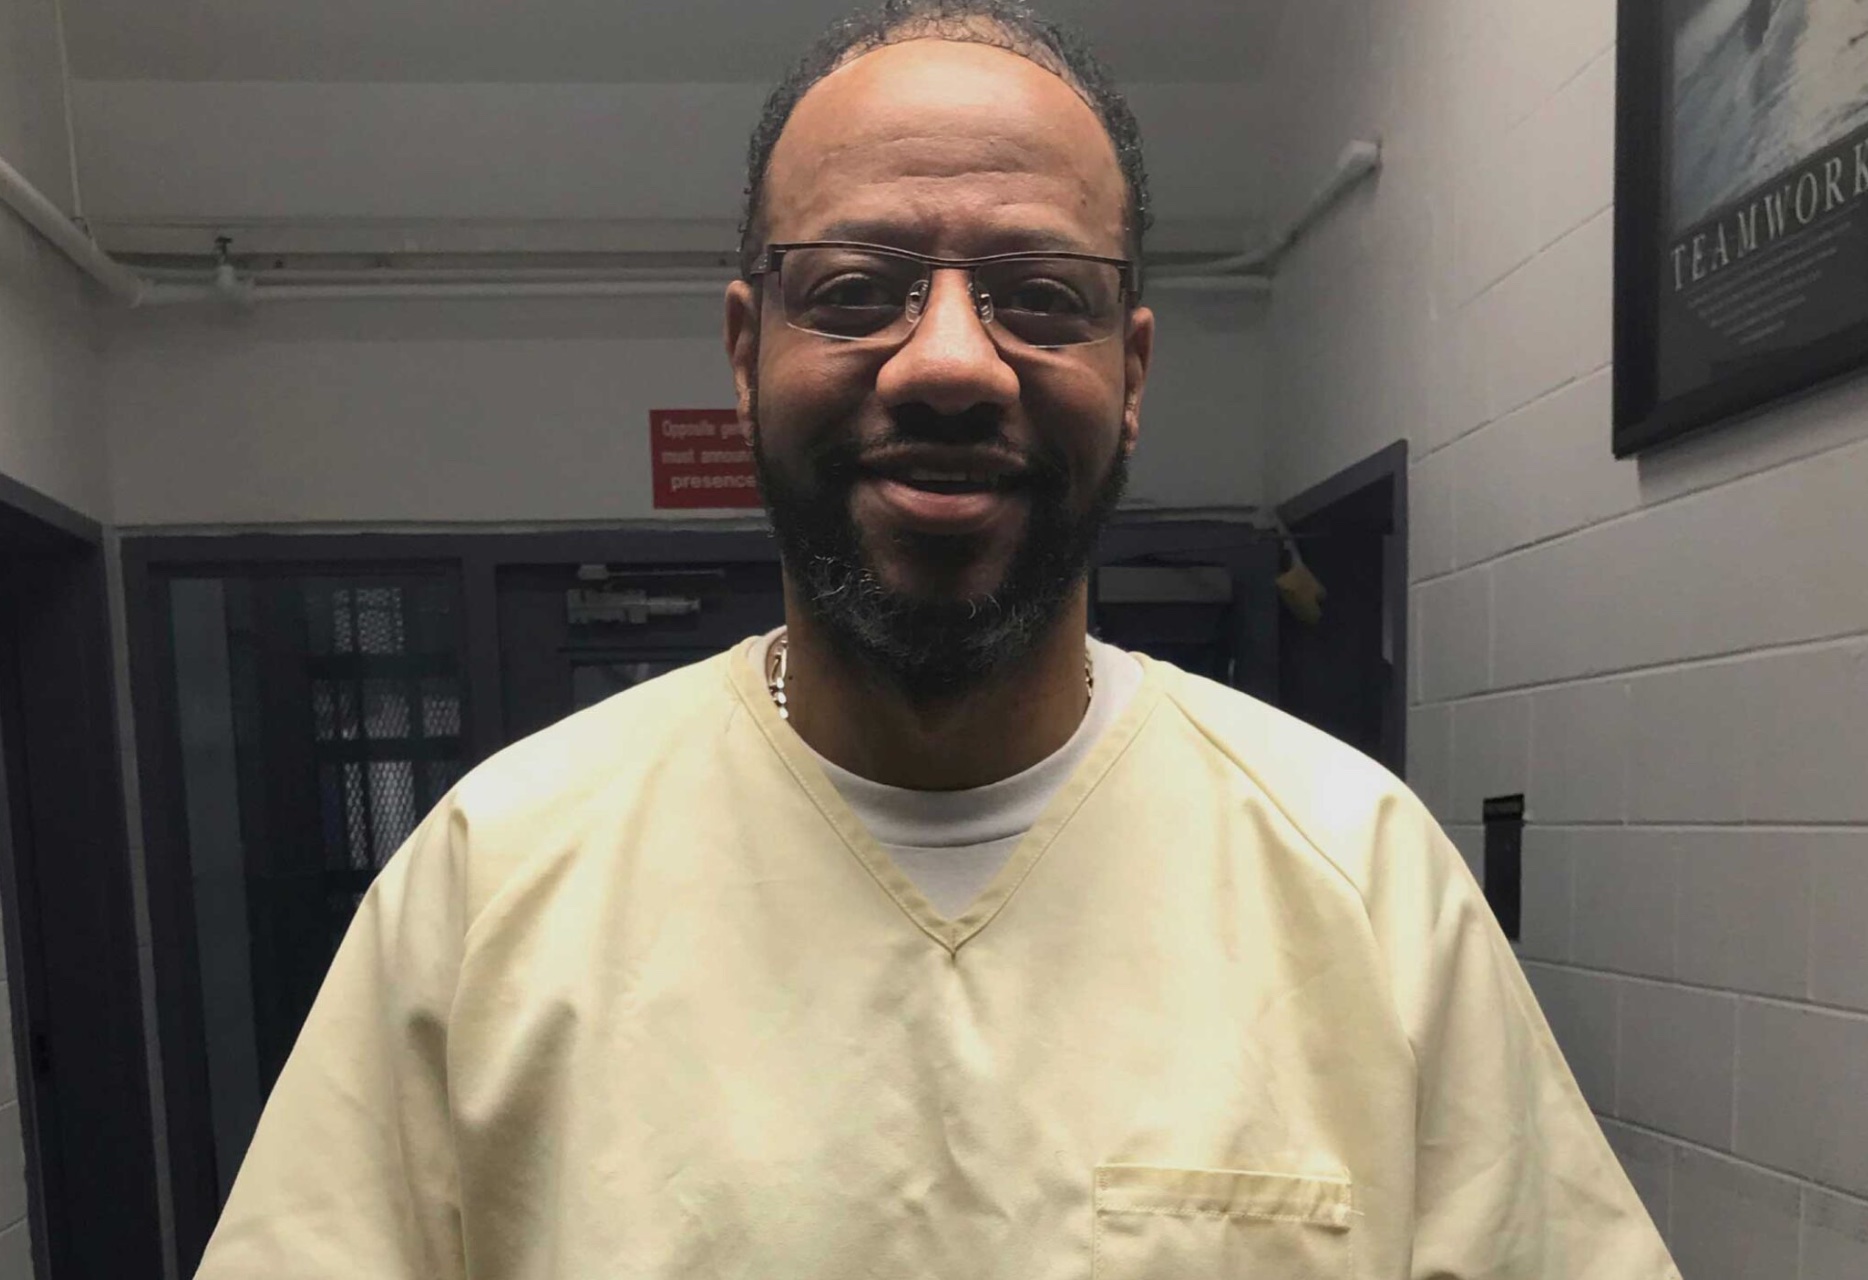 Pervis Payne in Riverbend Maximum Security institution in Tennessee. Photo courtesy of PervisPayne.Org.